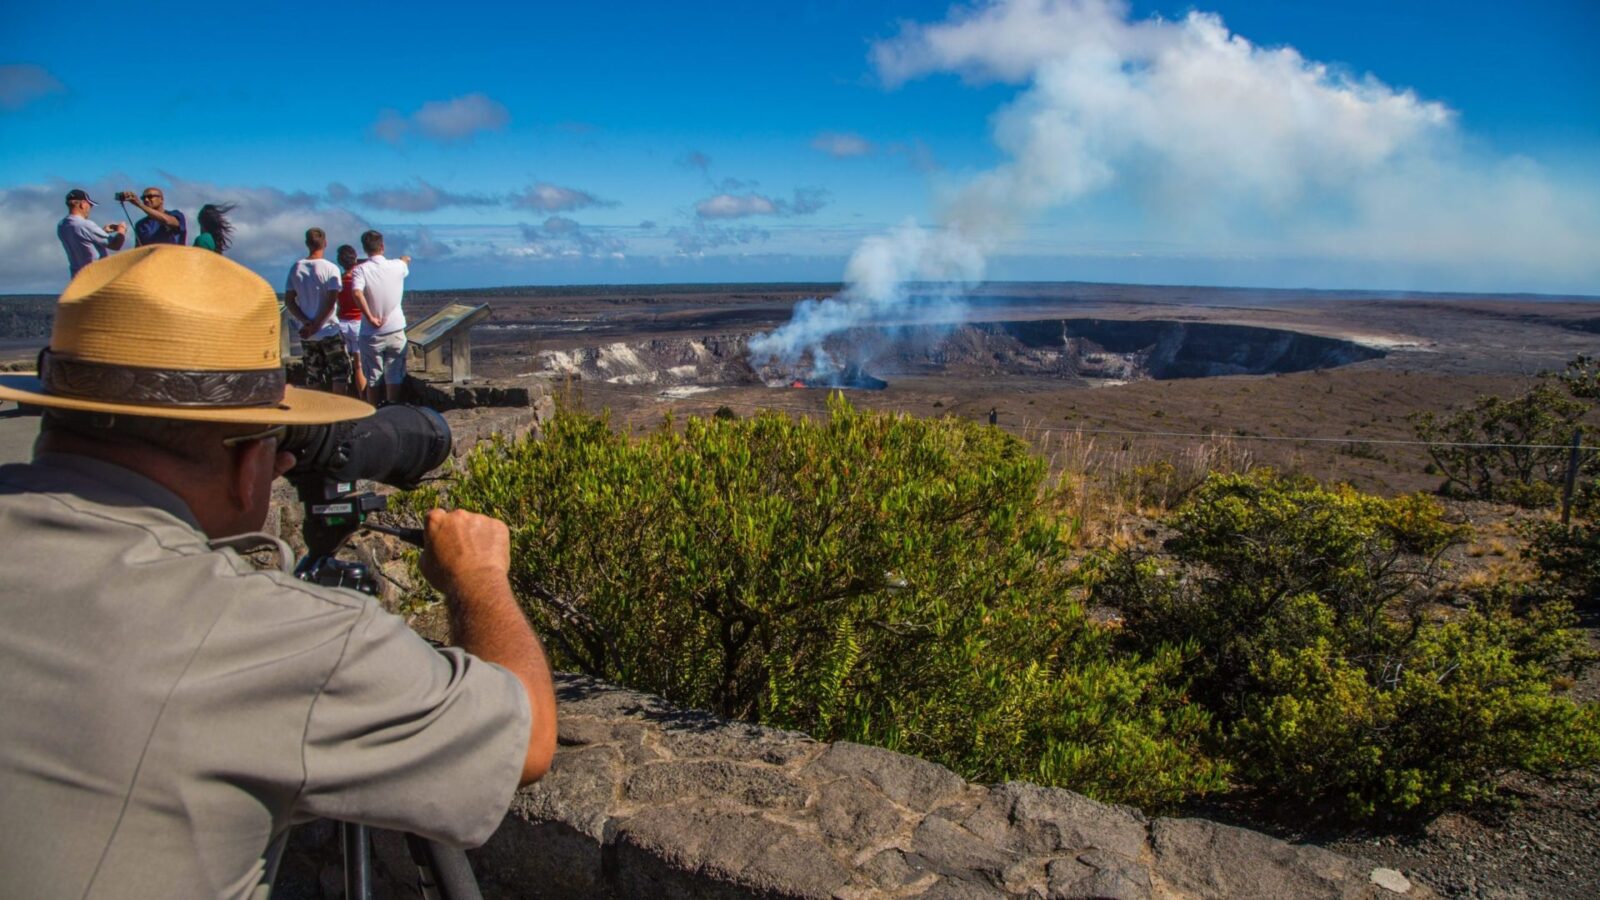 can you visit volcano national park right now